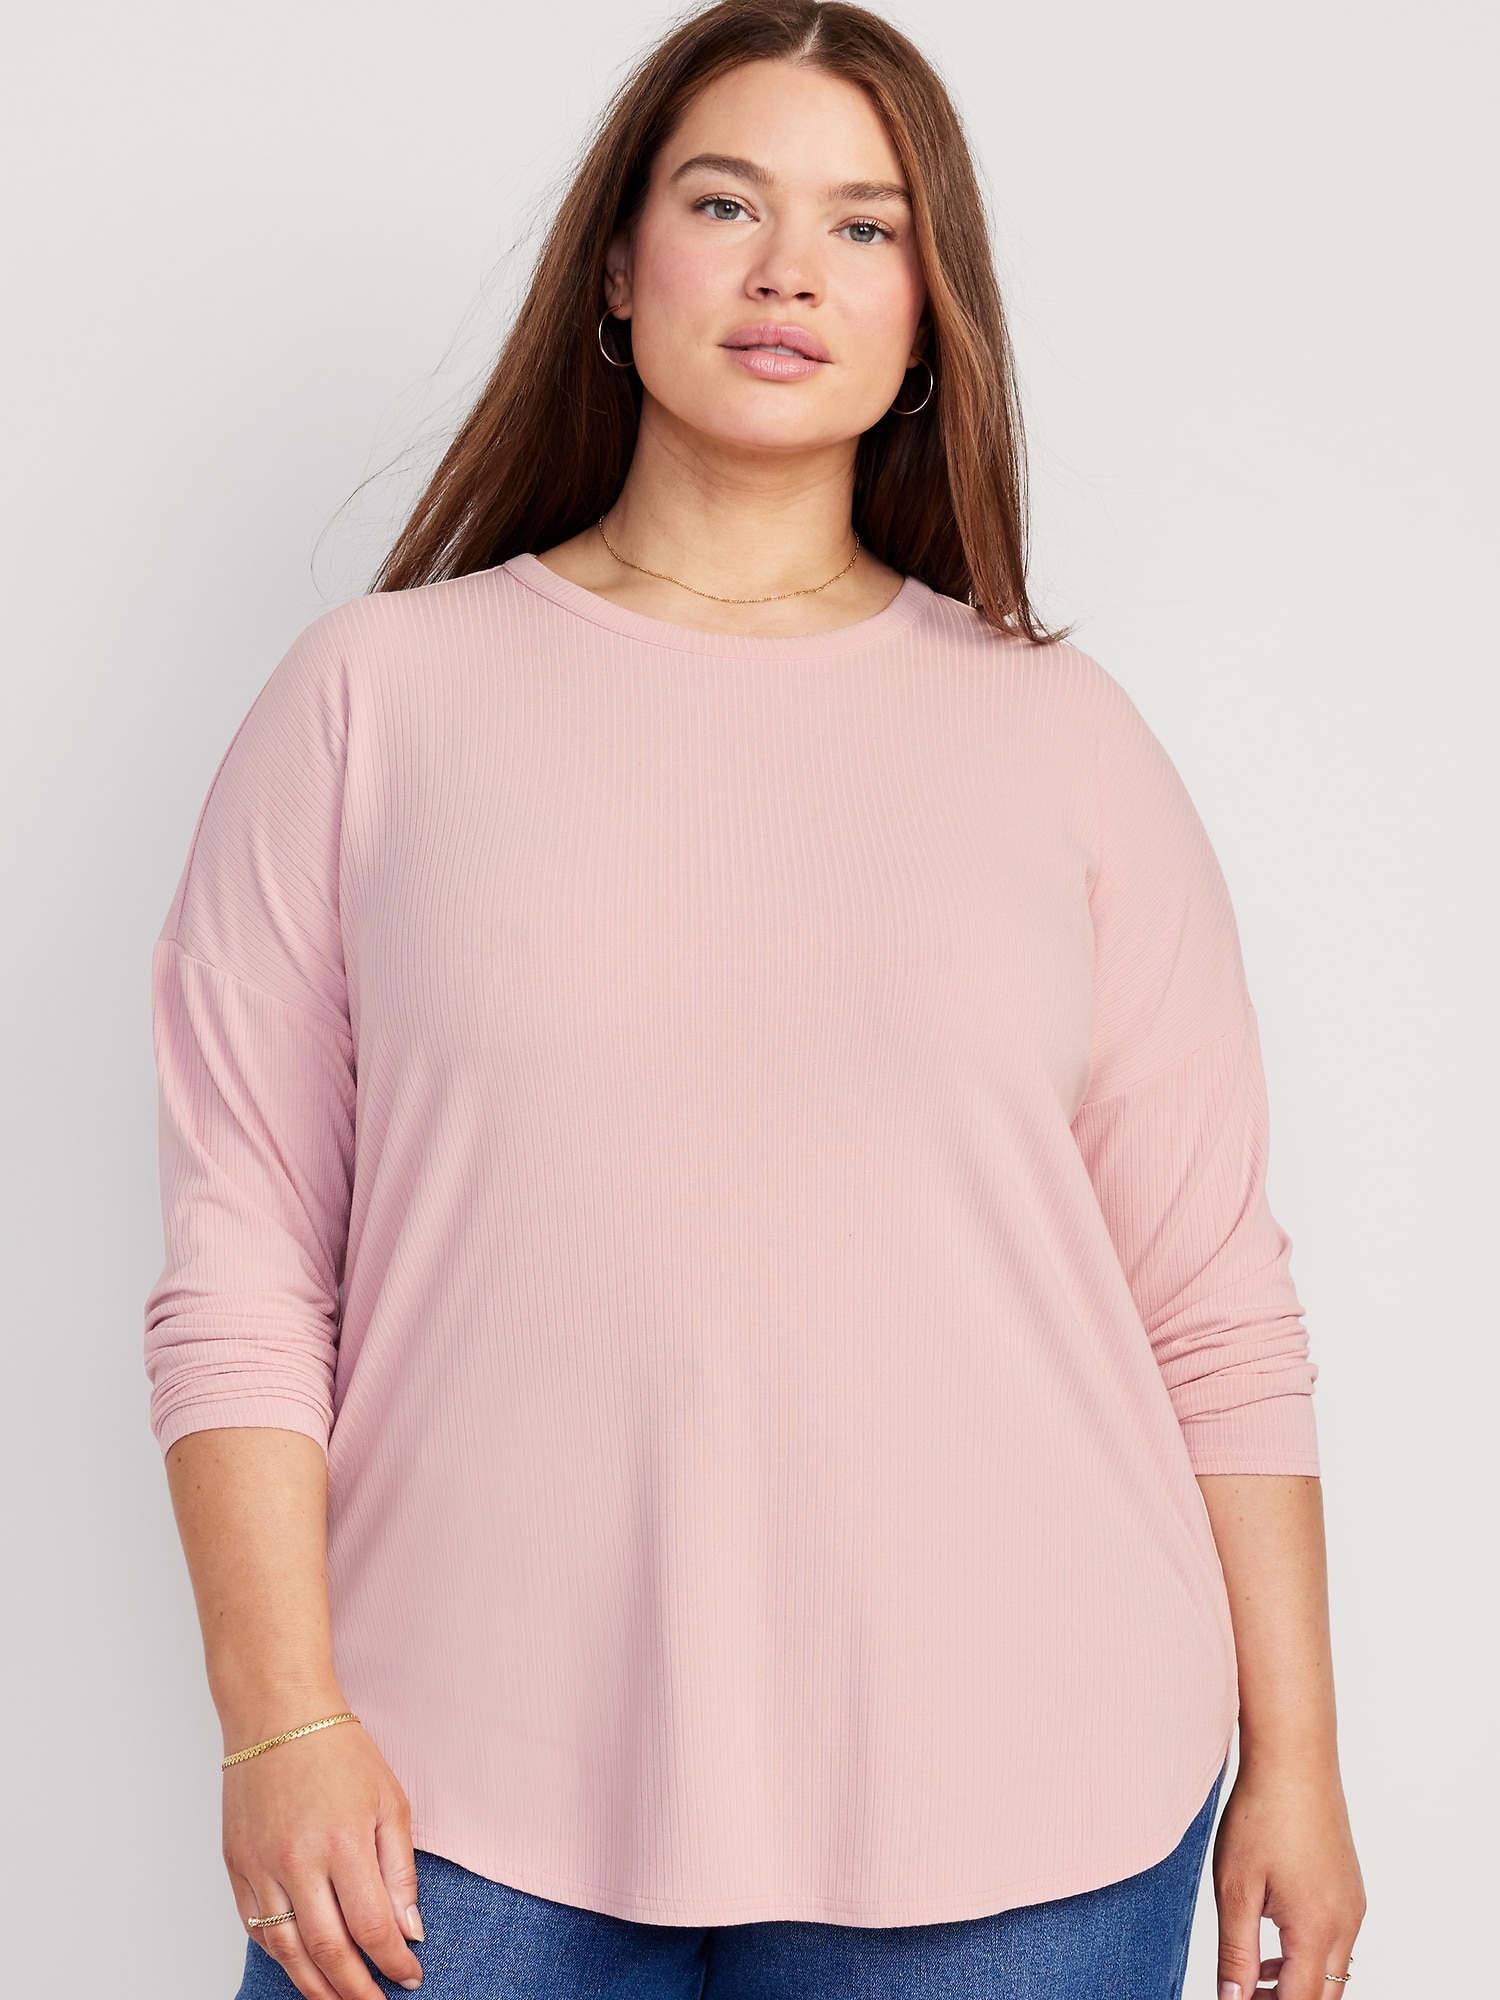 Tunic | T-Shirt Old Navy Rib-Knit for Women Luxe